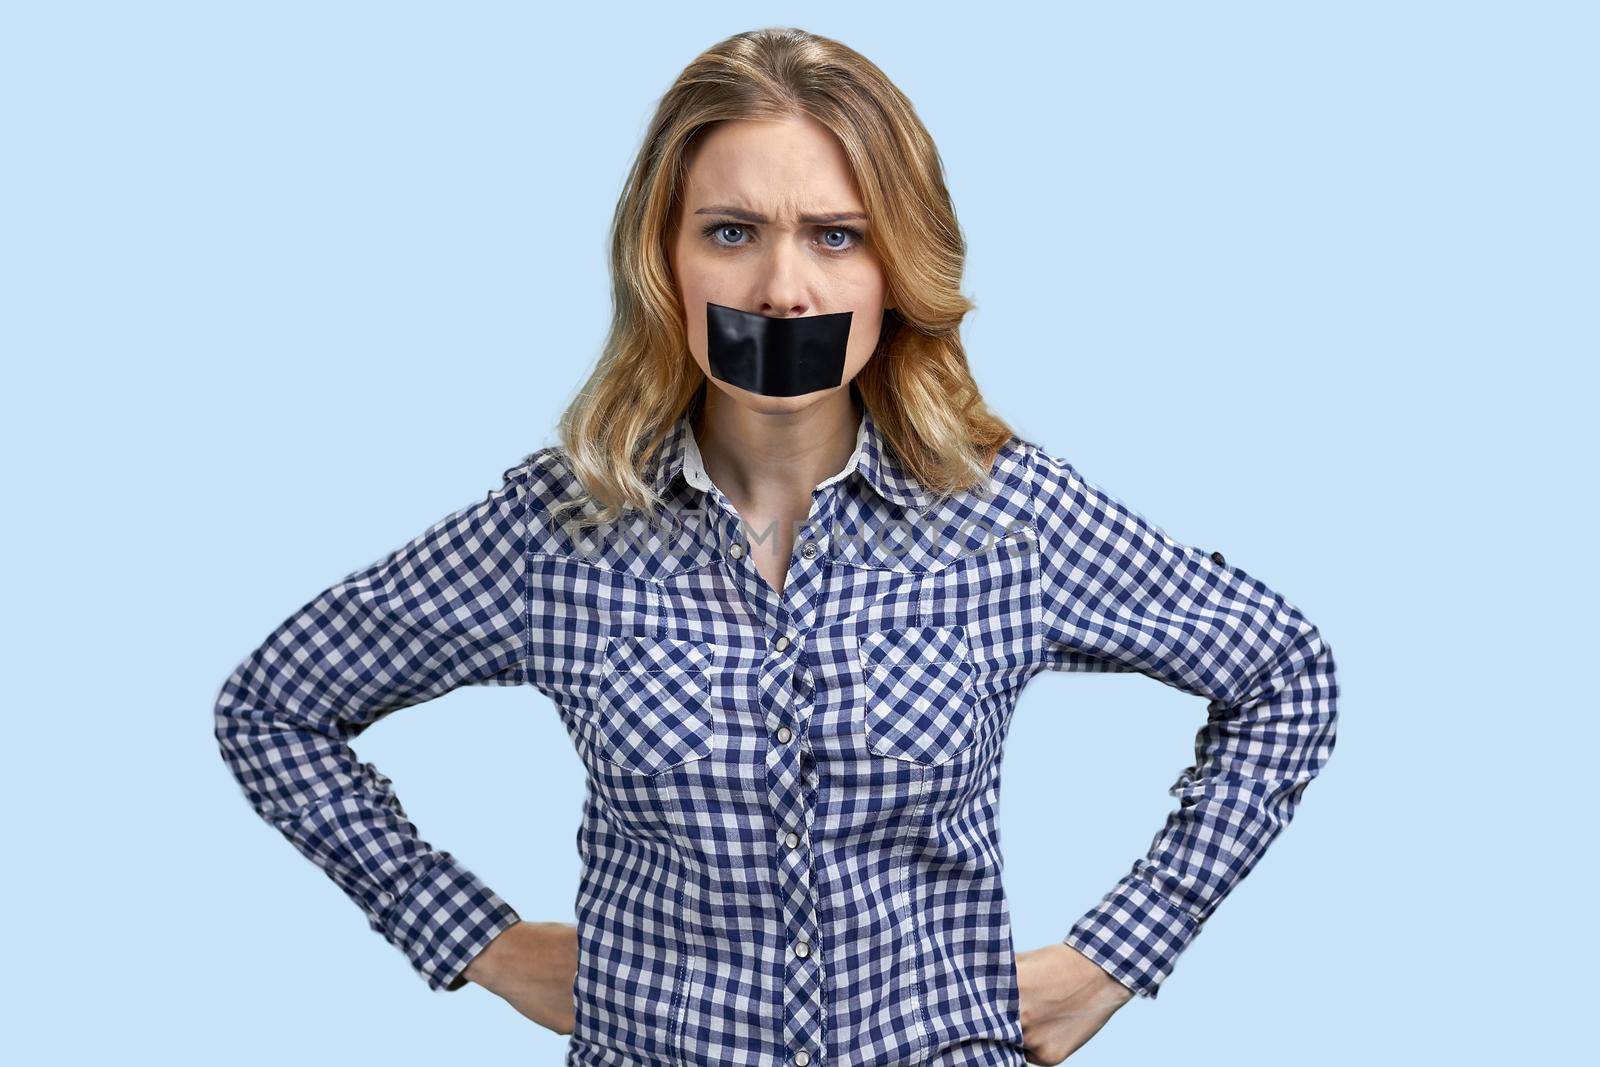 Irritated angry young woman with mouth covered with tape. Policy and human rights.